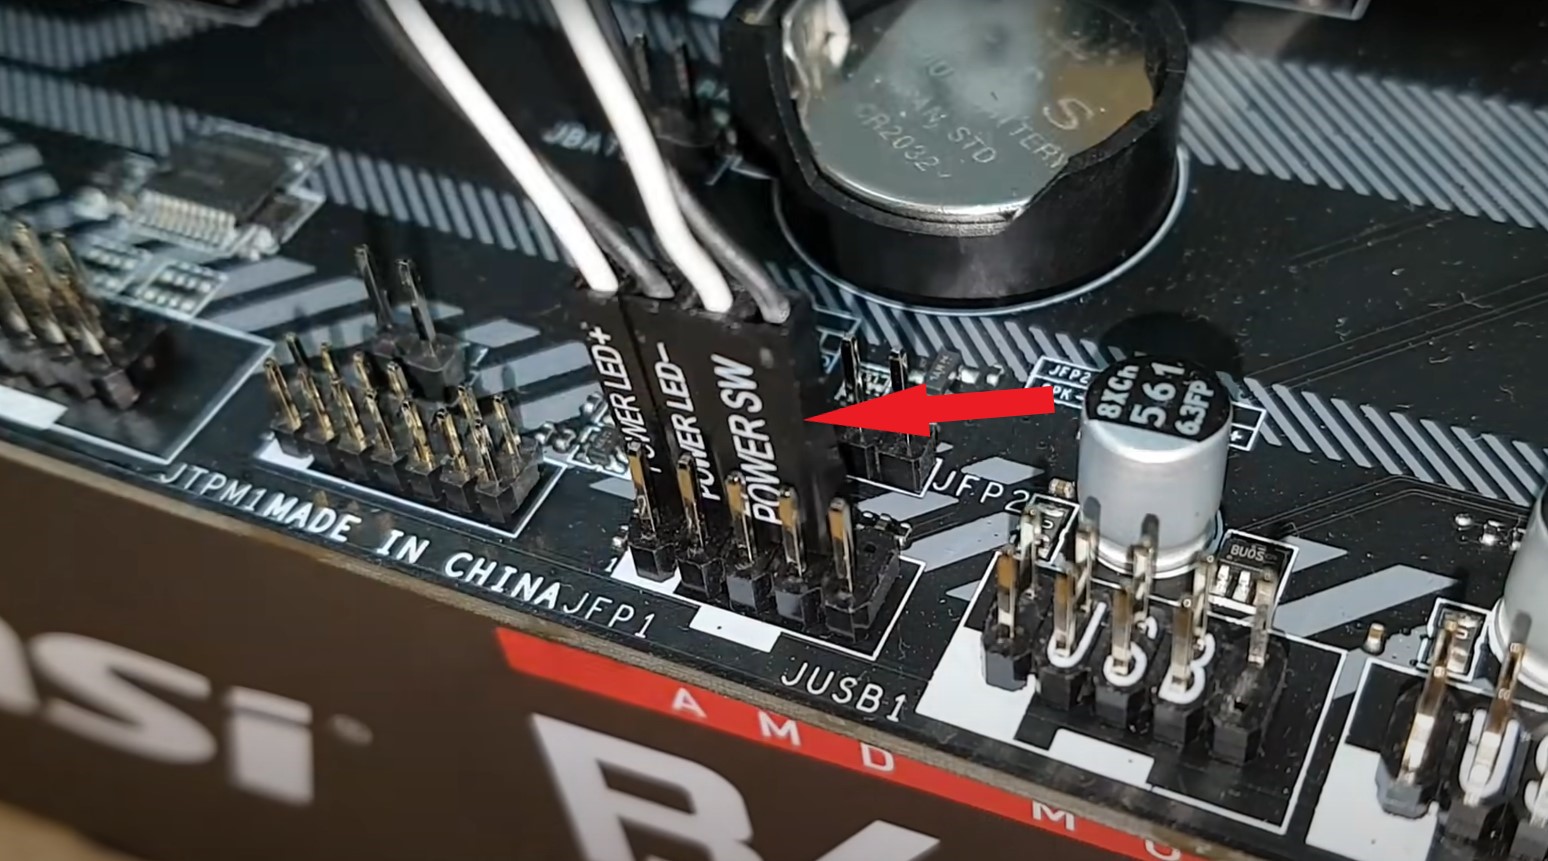 How To Connect Power Button To Motherboard [Step By Step]